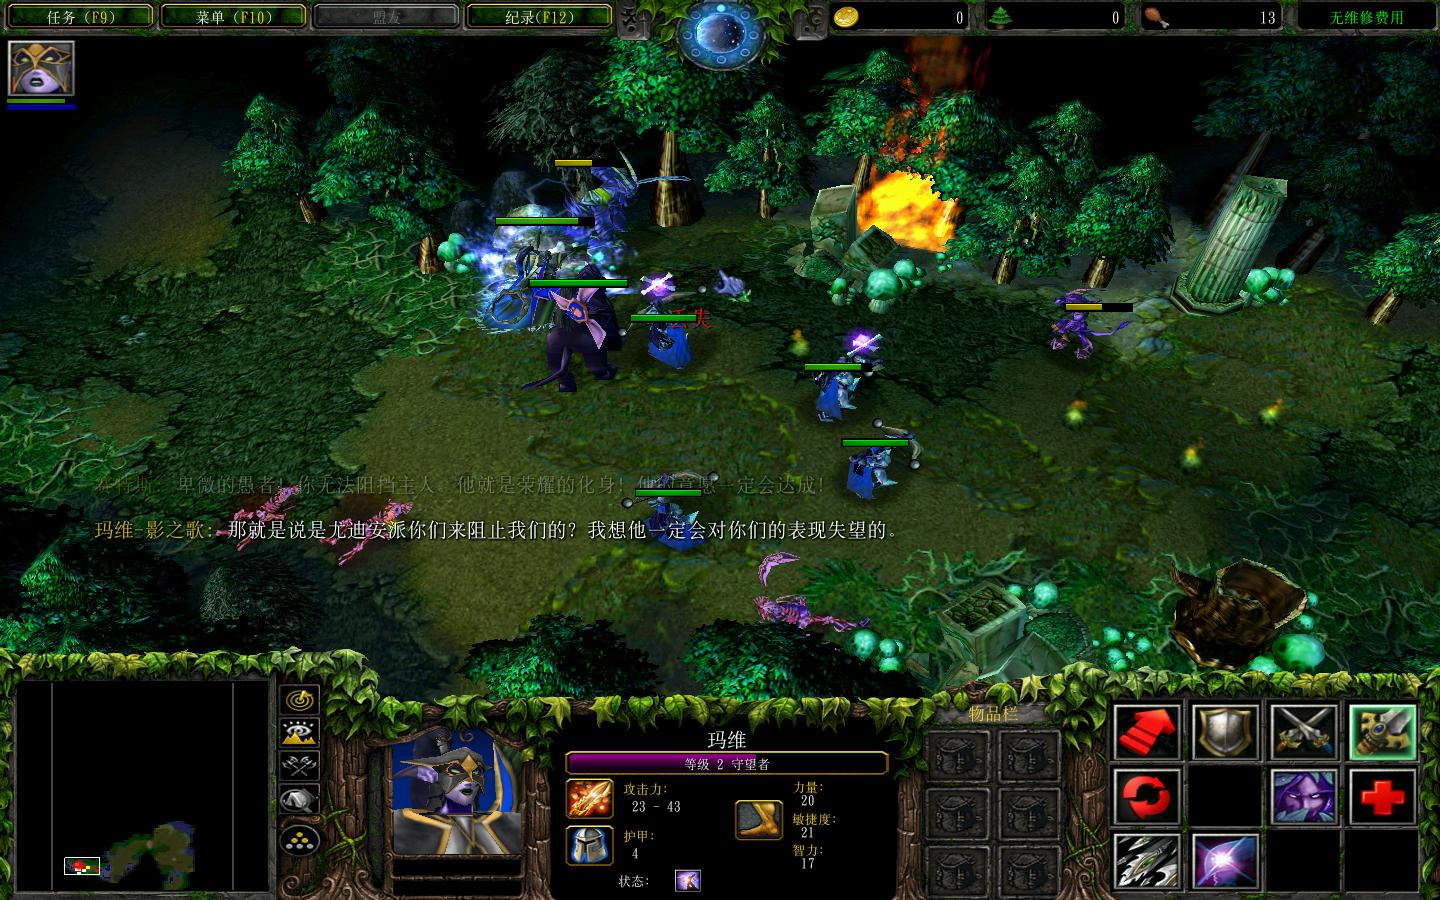 ħ3Warcraft III The Frozen Thronev1.24߸Ӣ۵;ʽv2.0.5